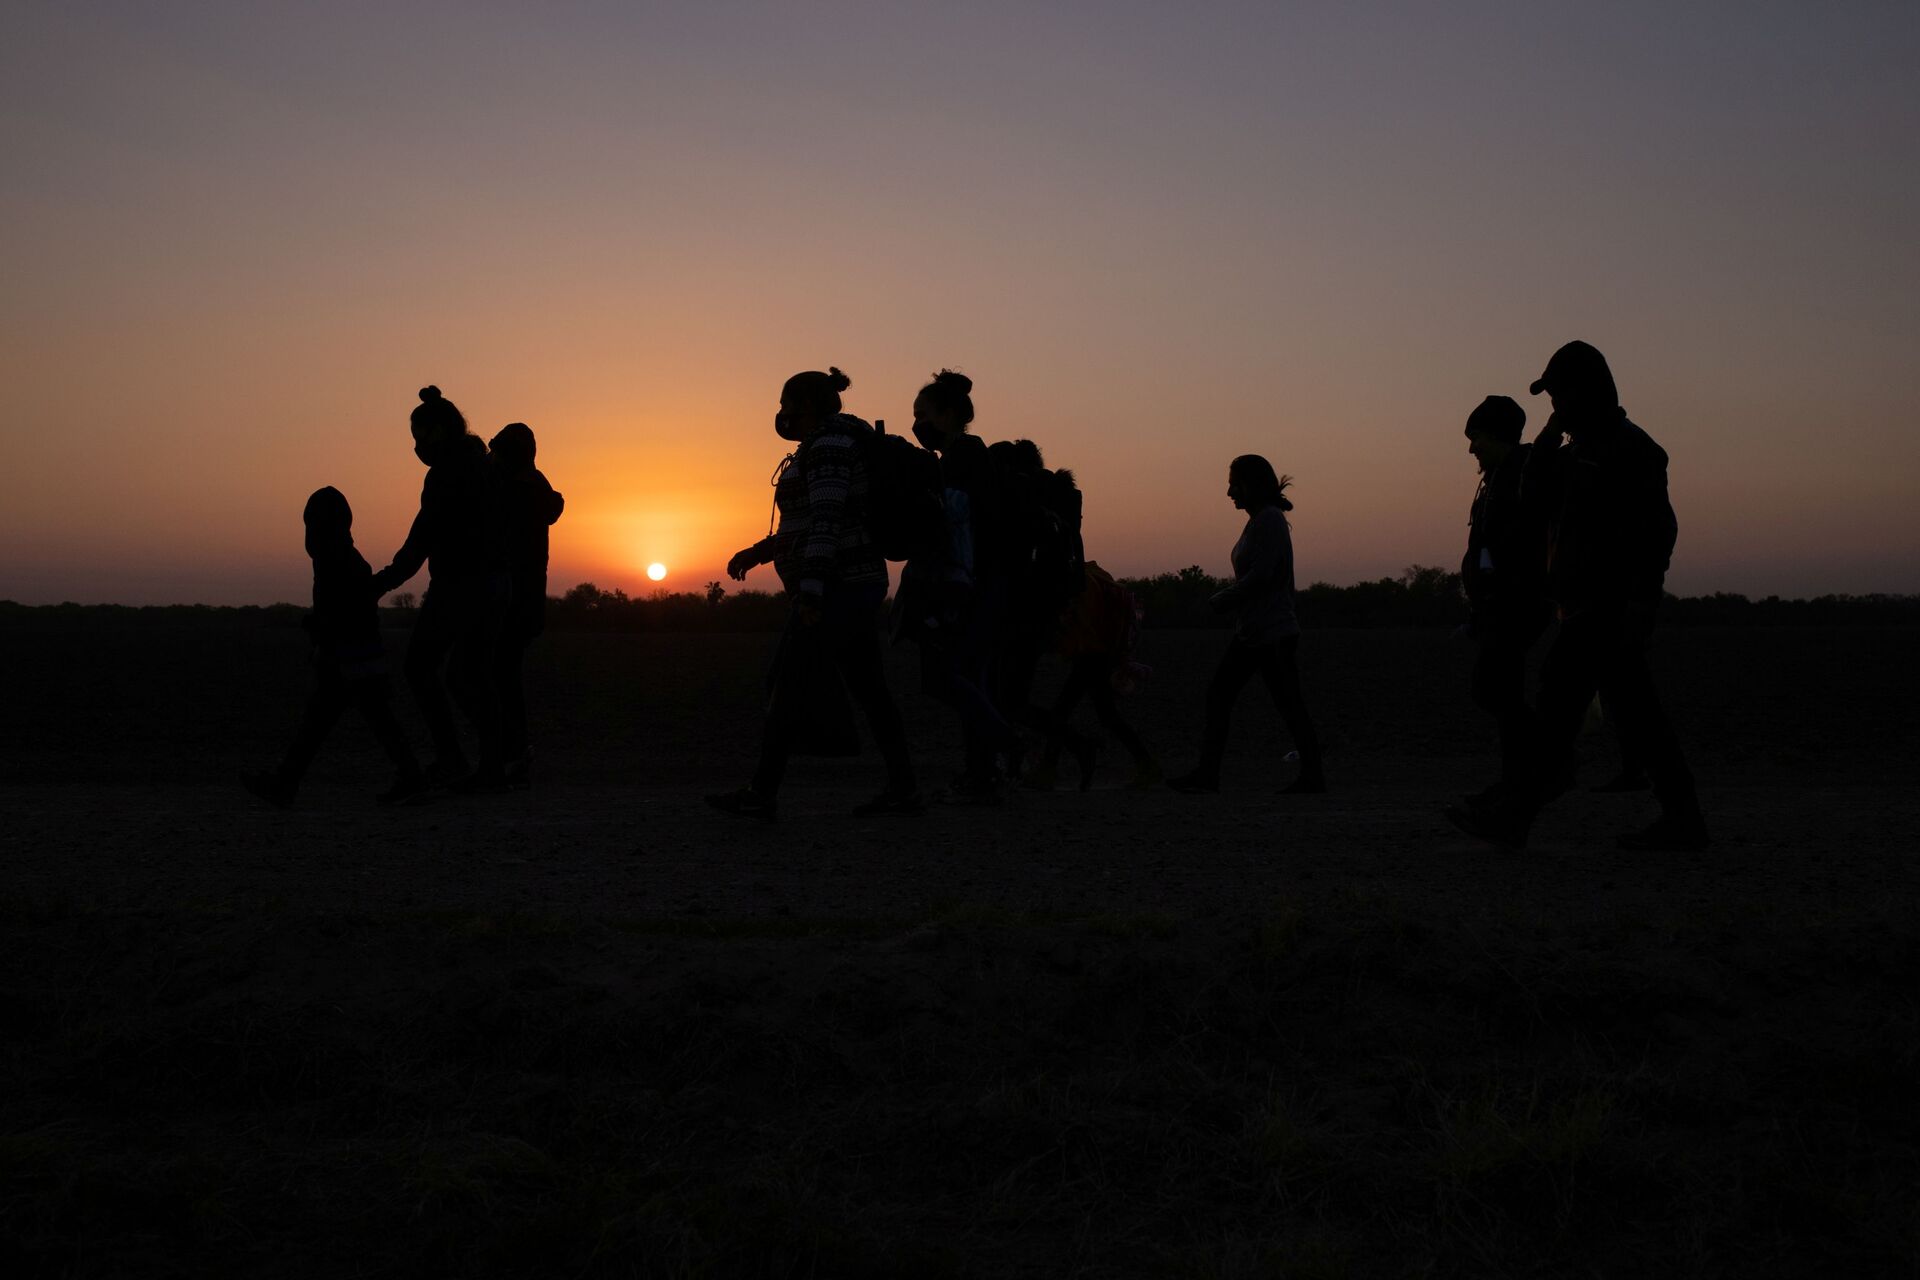 The sun rises as asylum-seeking migrants' families from Honduras and El Salvador walk towards the border wall after crossing the Rio Grande river into the United States from Mexico on a raft, in Penitas, Texas, U.S., March 26, 2021 - Sputnik International, 1920, 07.09.2021